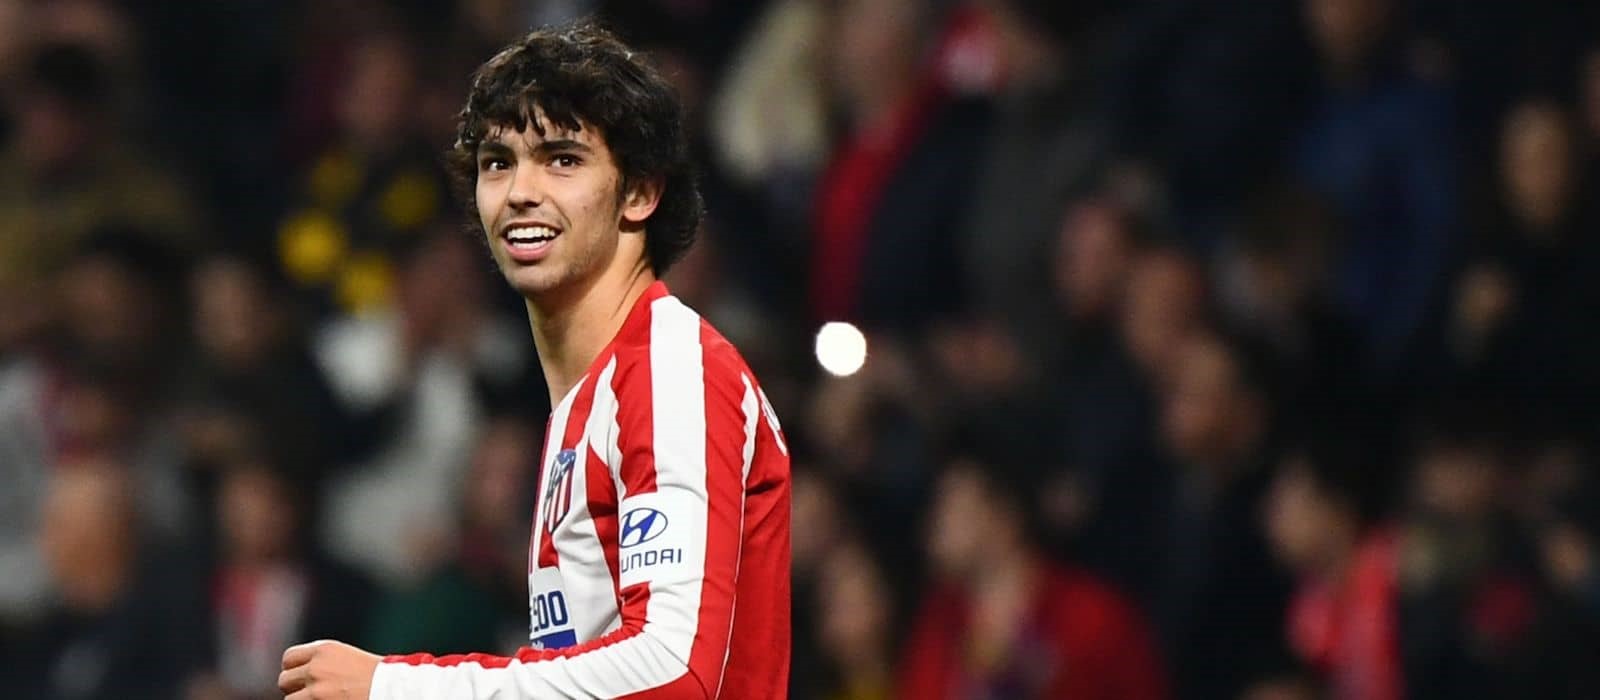 Joao Felix to Replace Sancho in Manchester United